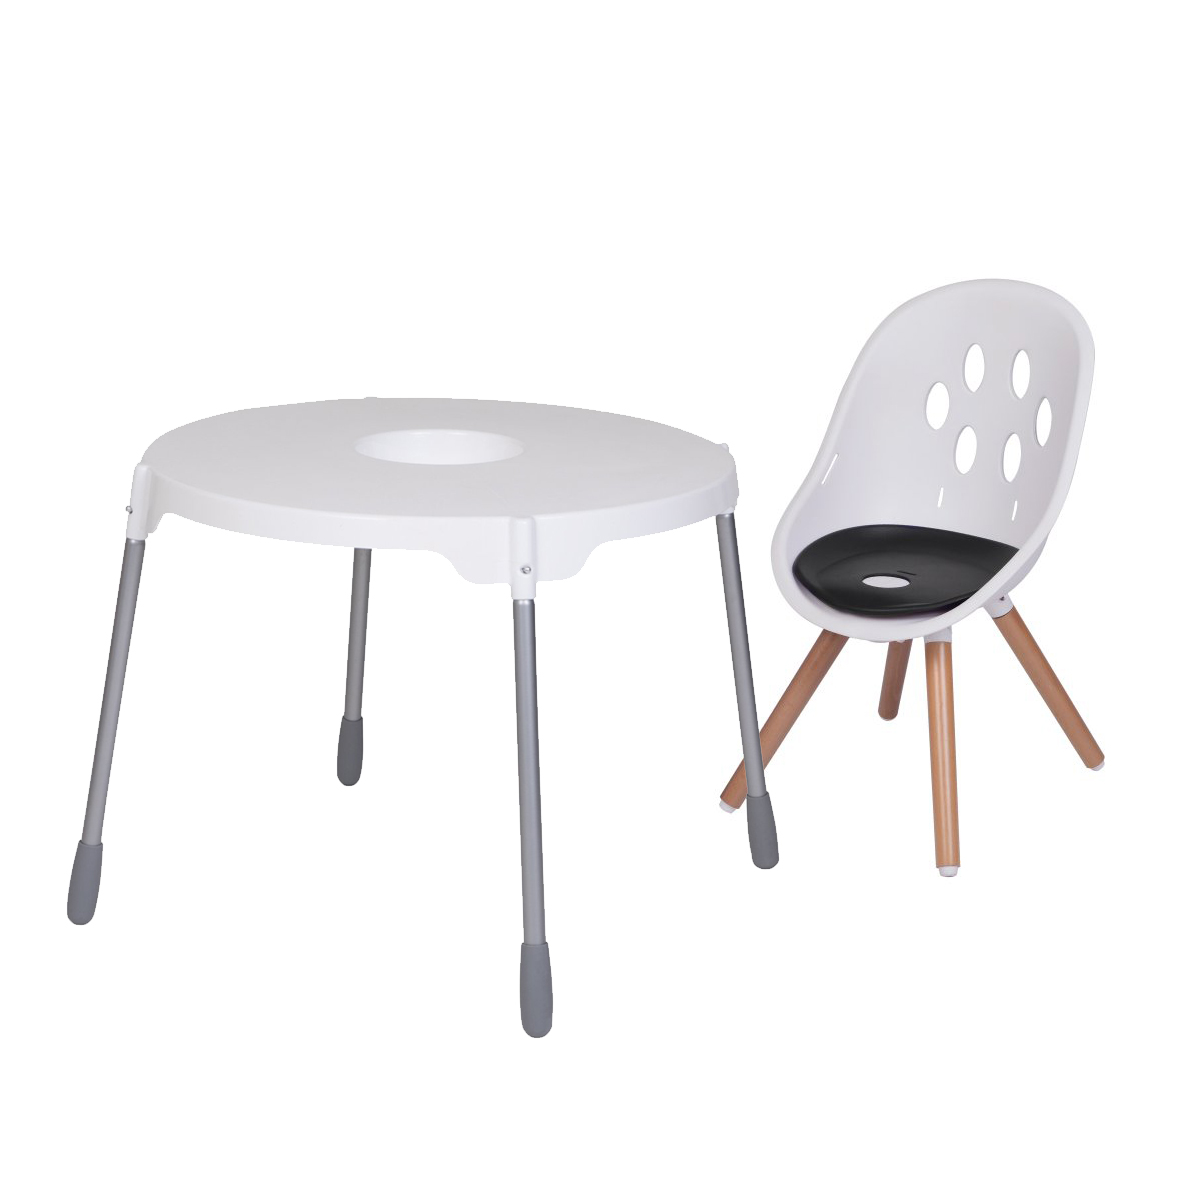 https://cdn.accentuate.io/4696065704033/19793939267754/phil_and_teds_poppy_wood_leg_high_chair_to_my_chair_dual_modes_1_combo-v1630984549860.jpg?1200x1200